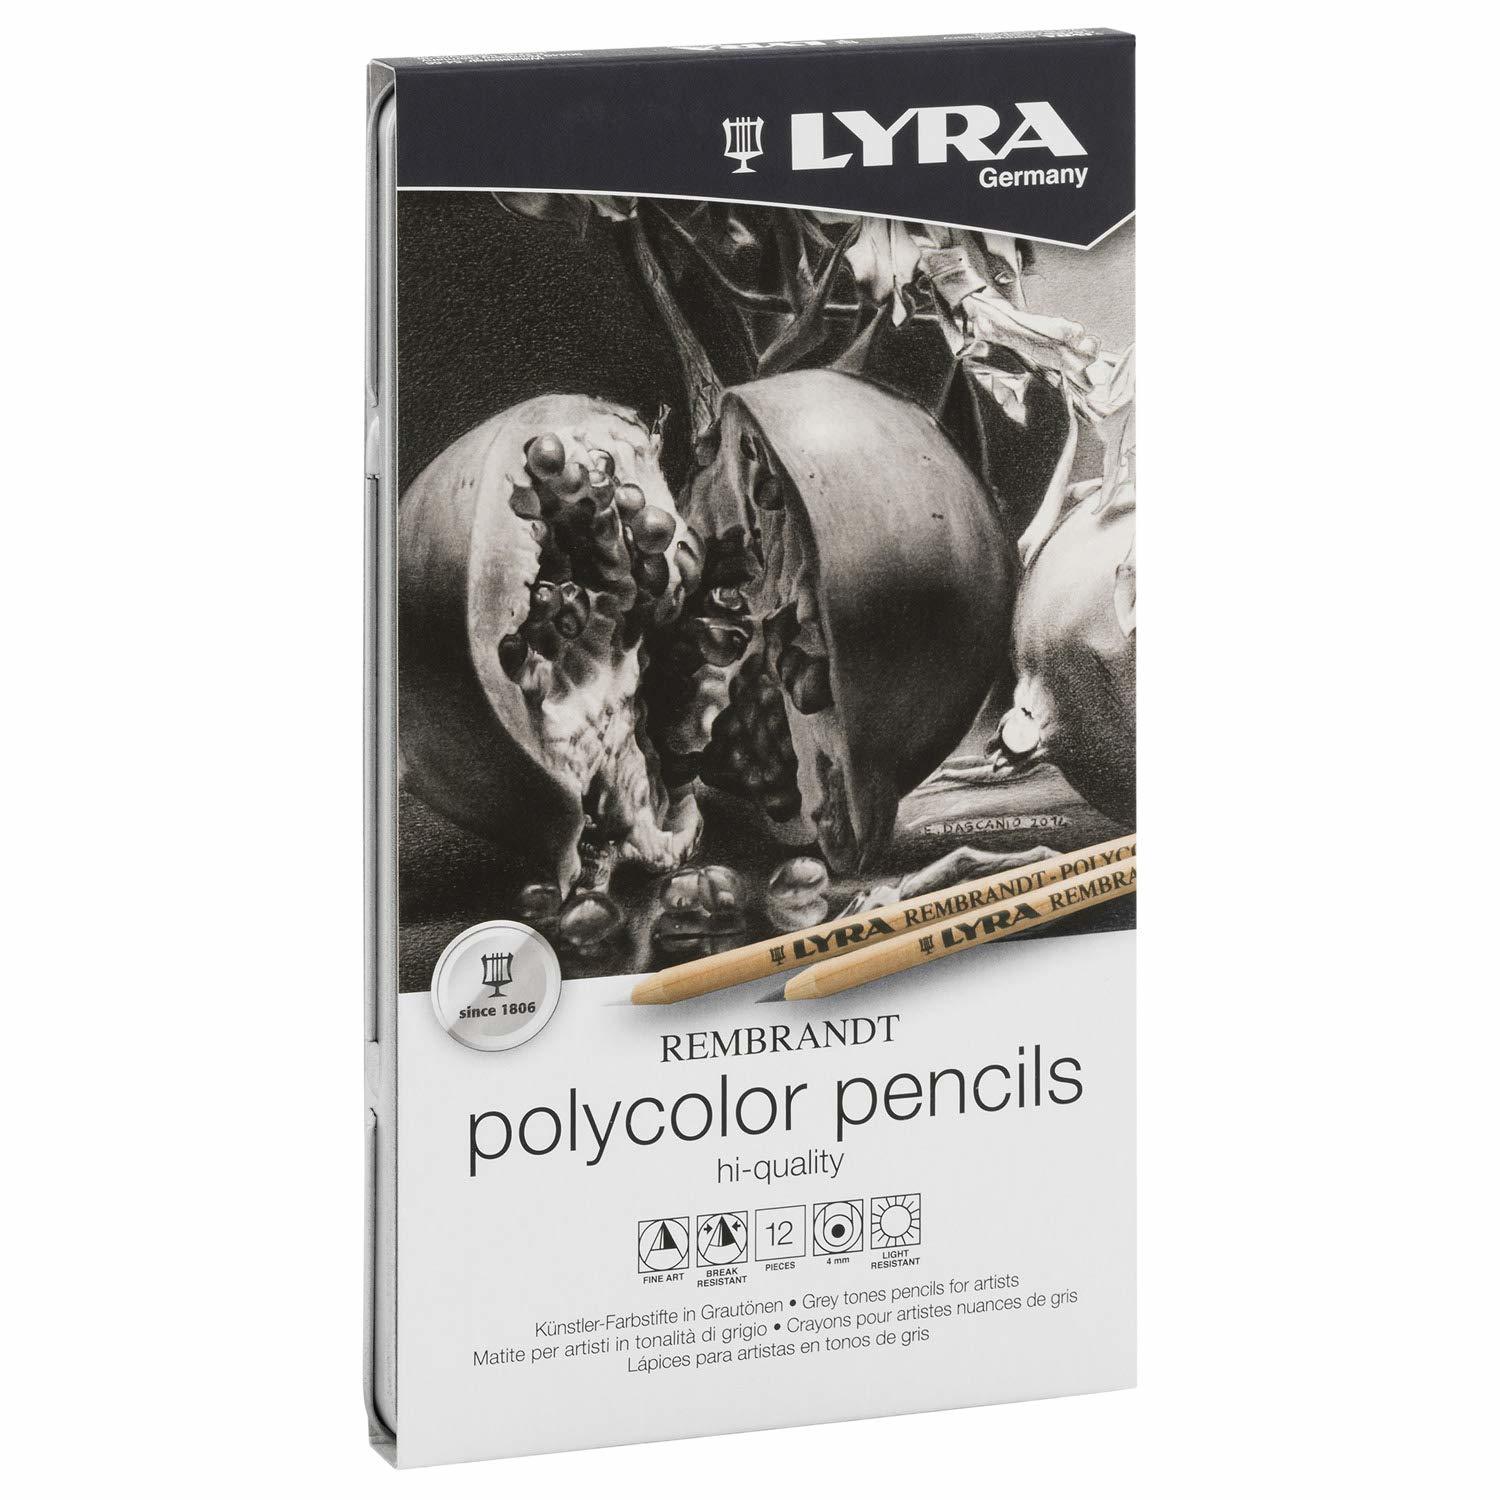 Primary image for Lyra Rembrandt Polycolor Colored Pencils - 12 Grey Professional Colored Pencils 